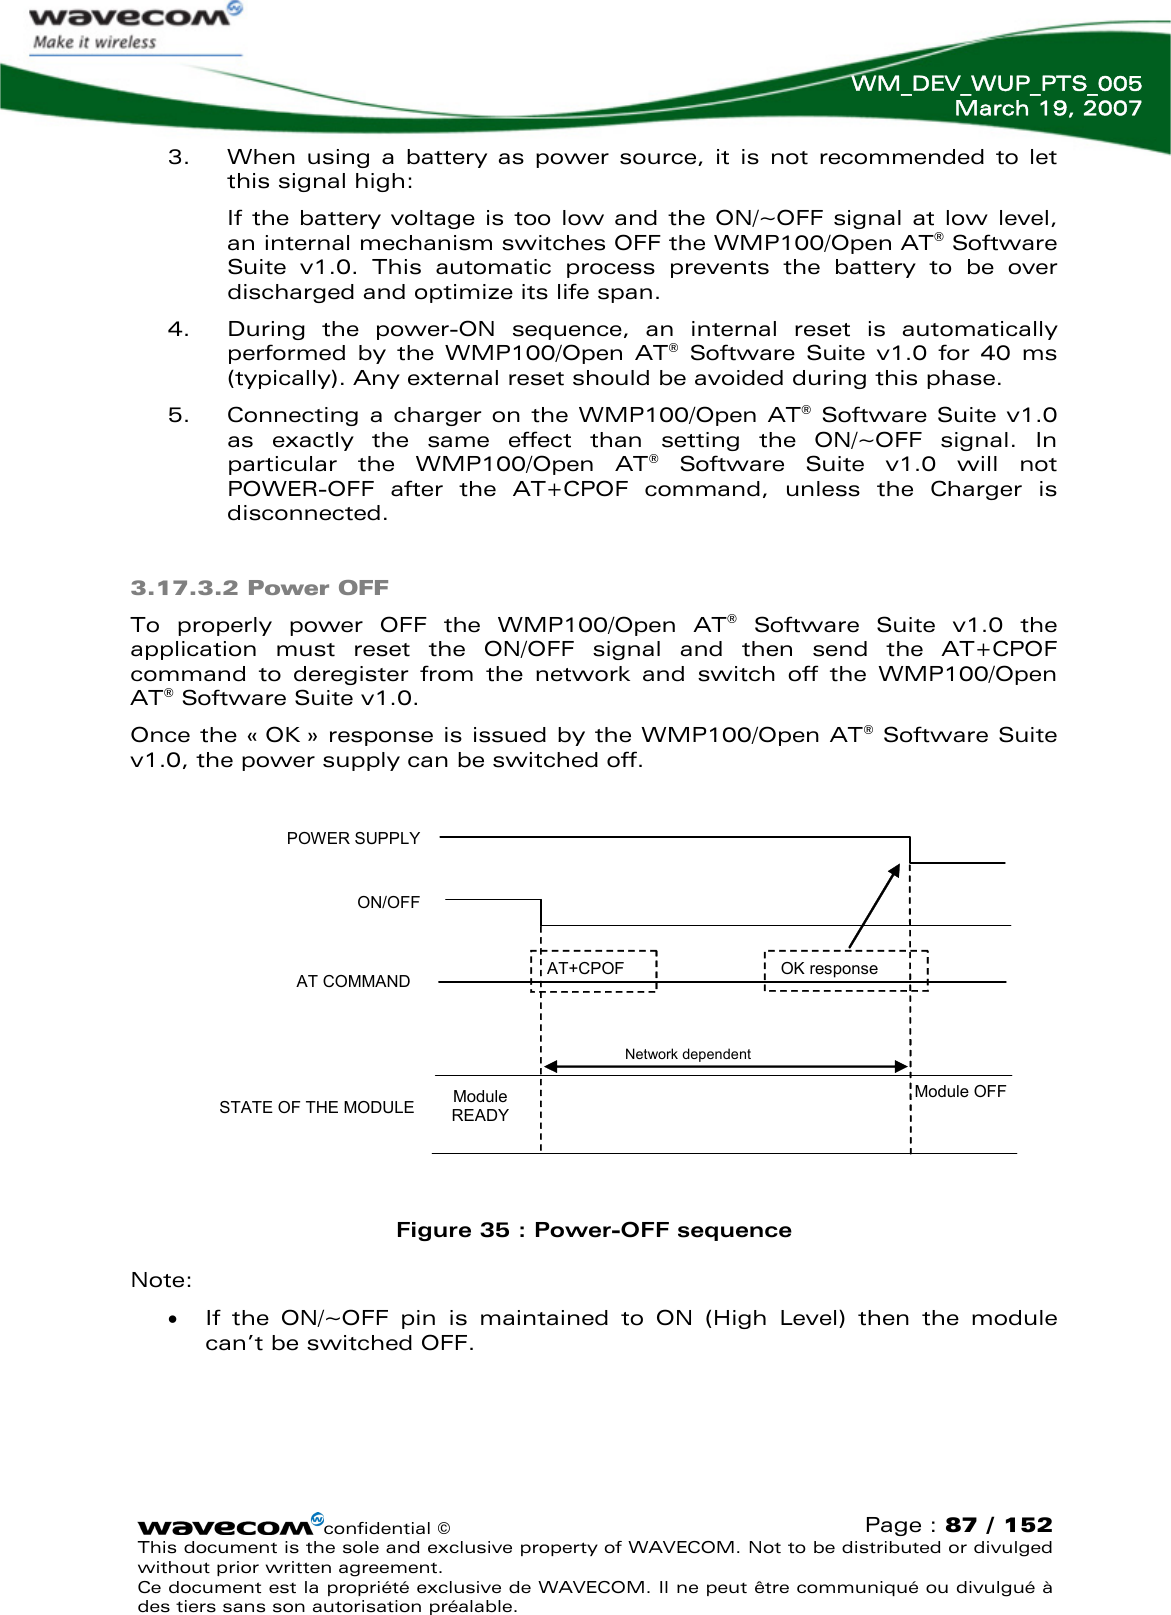   WM_DEV_WUP_PTS_005 March 19, 2007  confidential © Page : 87 / 152 This document is the sole and exclusive property of WAVECOM. Not to be distributed or divulged without prior written agreement.  Ce document est la propriété exclusive de WAVECOM. Il ne peut être communiqué ou divulgué à des tiers sans son autorisation préalable.  POWER SUPPLY ON/OFF AT COMMAND STATE OF THE MODULE 3. When using a battery as power source, it is not recommended to let this signal high: If the battery voltage is too low and the ON/~OFF signal at low level, an internal mechanism switches OFF the WMP100/Open AT® Software Suite v1.0. This automatic process prevents the battery to be over discharged and optimize its life span. 4. During the power-ON sequence, an internal reset is automatically performed by the WMP100/Open AT® Software Suite v1.0 for 40 ms (typically). Any external reset should be avoided during this phase. 5. Connecting a charger on the WMP100/Open AT® Software Suite v1.0 as exactly the same effect than setting the ON/~OFF signal. In particular the WMP100/Open AT® Software Suite v1.0 will not POWER-OFF after the AT+CPOF command, unless the Charger is disconnected. 3.17.3.2 Power OFF To properly power OFF the WMP100/Open AT® Software Suite v1.0 the application must reset the ON/OFF signal and then send the AT+CPOF command to deregister from the network and switch off the WMP100/Open AT® Software Suite v1.0.  Once the « OK » response is issued by the WMP100/Open AT® Software Suite v1.0, the power supply can be switched off.  AT+CPOF Module READY Module OFF IBB+RF&lt;22µA Network dependent OK response IBB+RF = overall current consumption (Base Band + RF part)   Figure 35 : Power-OFF sequence Note: • If the ON/~OFF pin is maintained to ON (High Level) then the module can’t be switched OFF. 